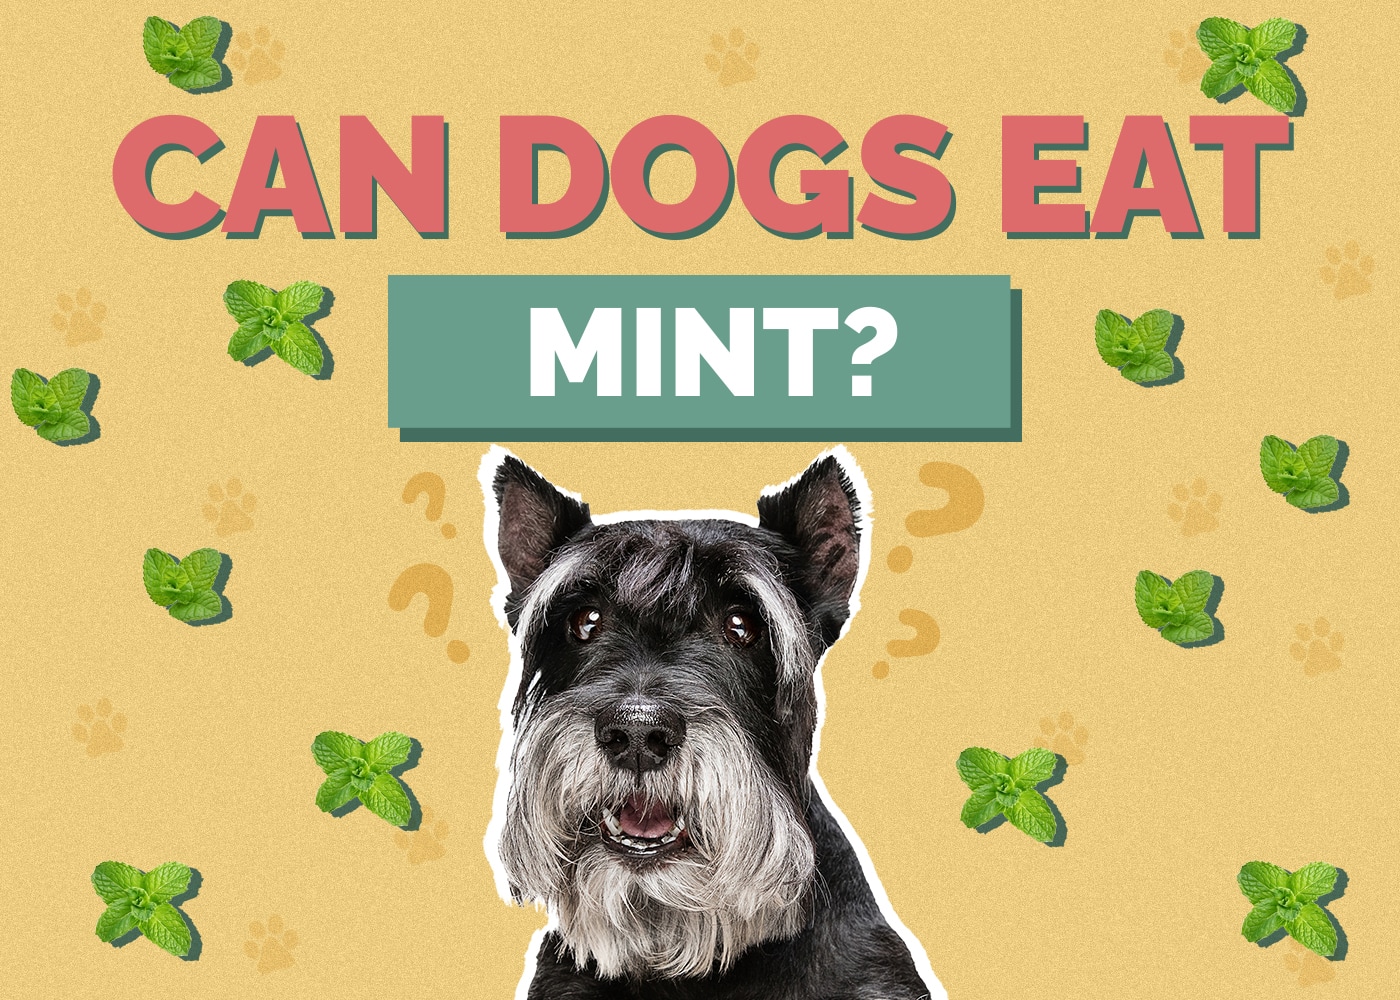 Can Dogs Eat mint